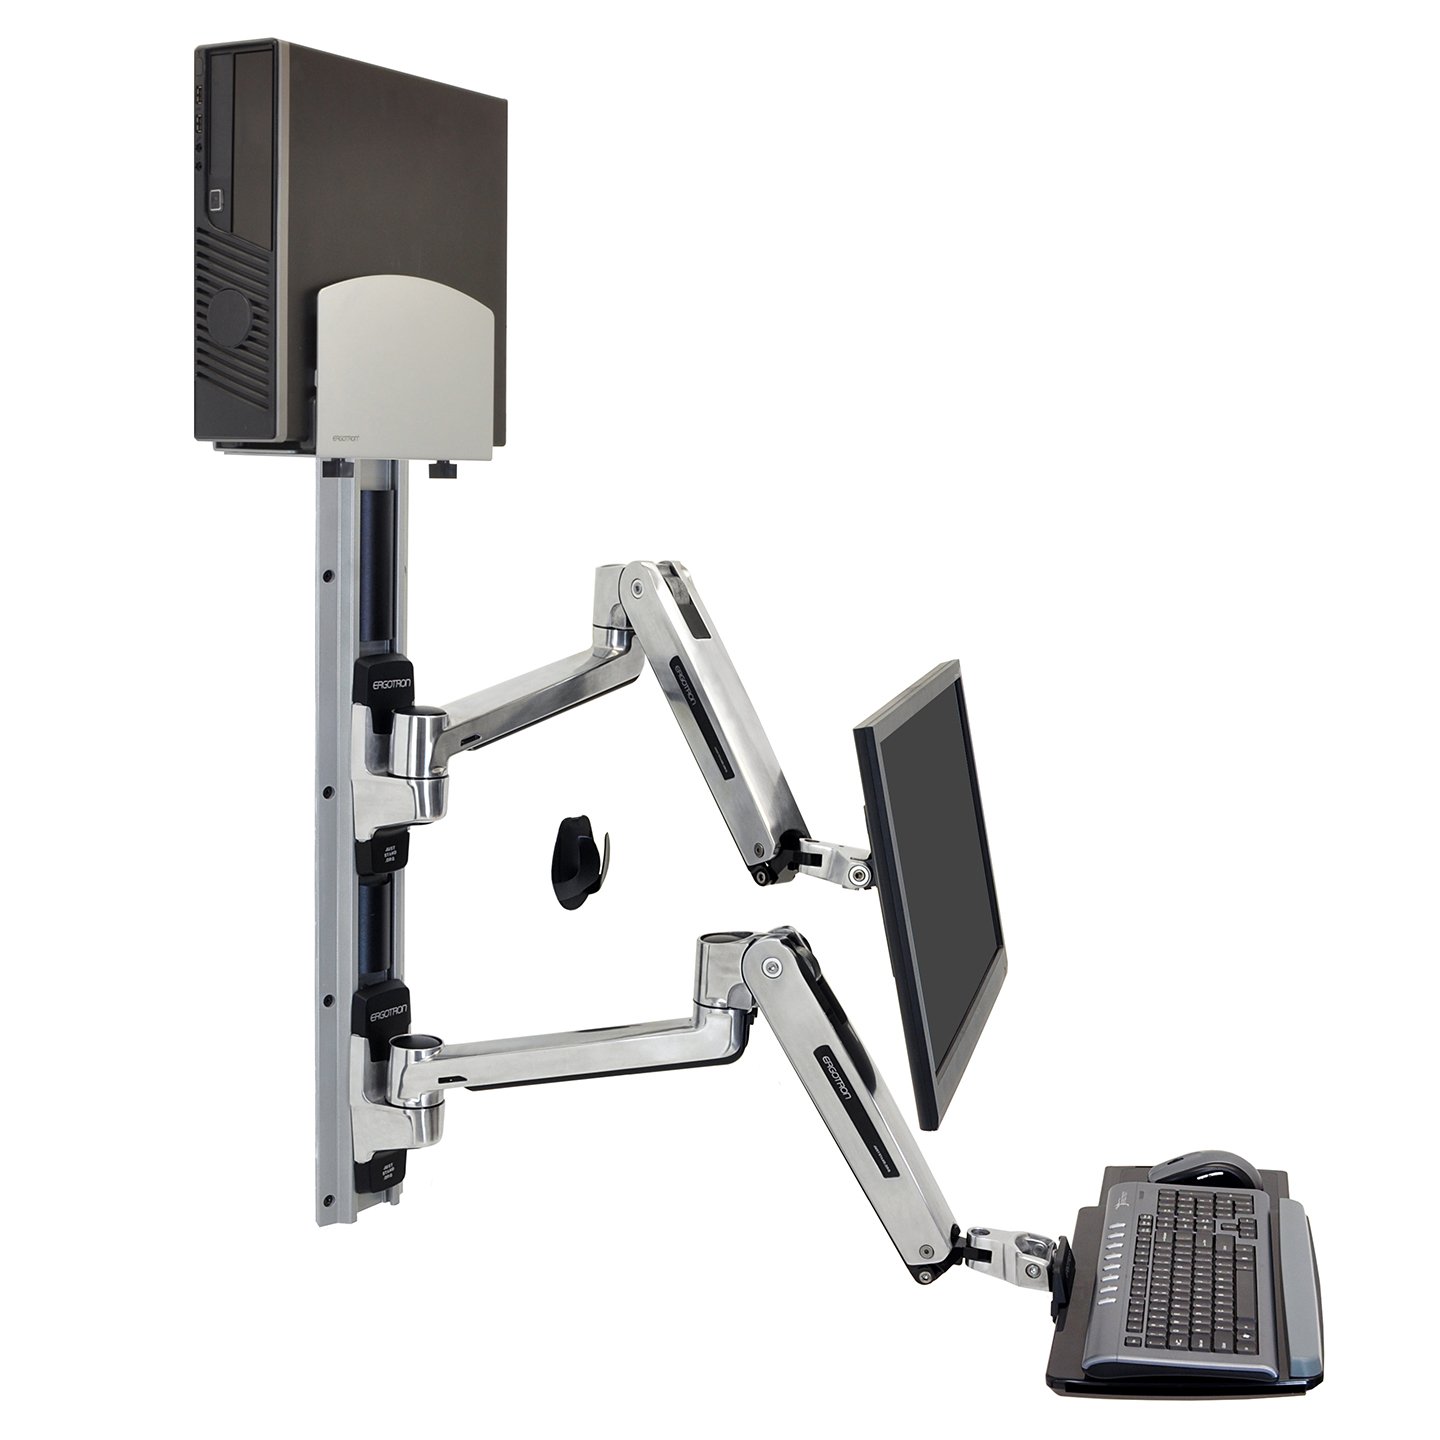 Haworth LX Wall Mount System Workspace with metal arms that can extend and fold and hold a monitor, pc, and keyboard